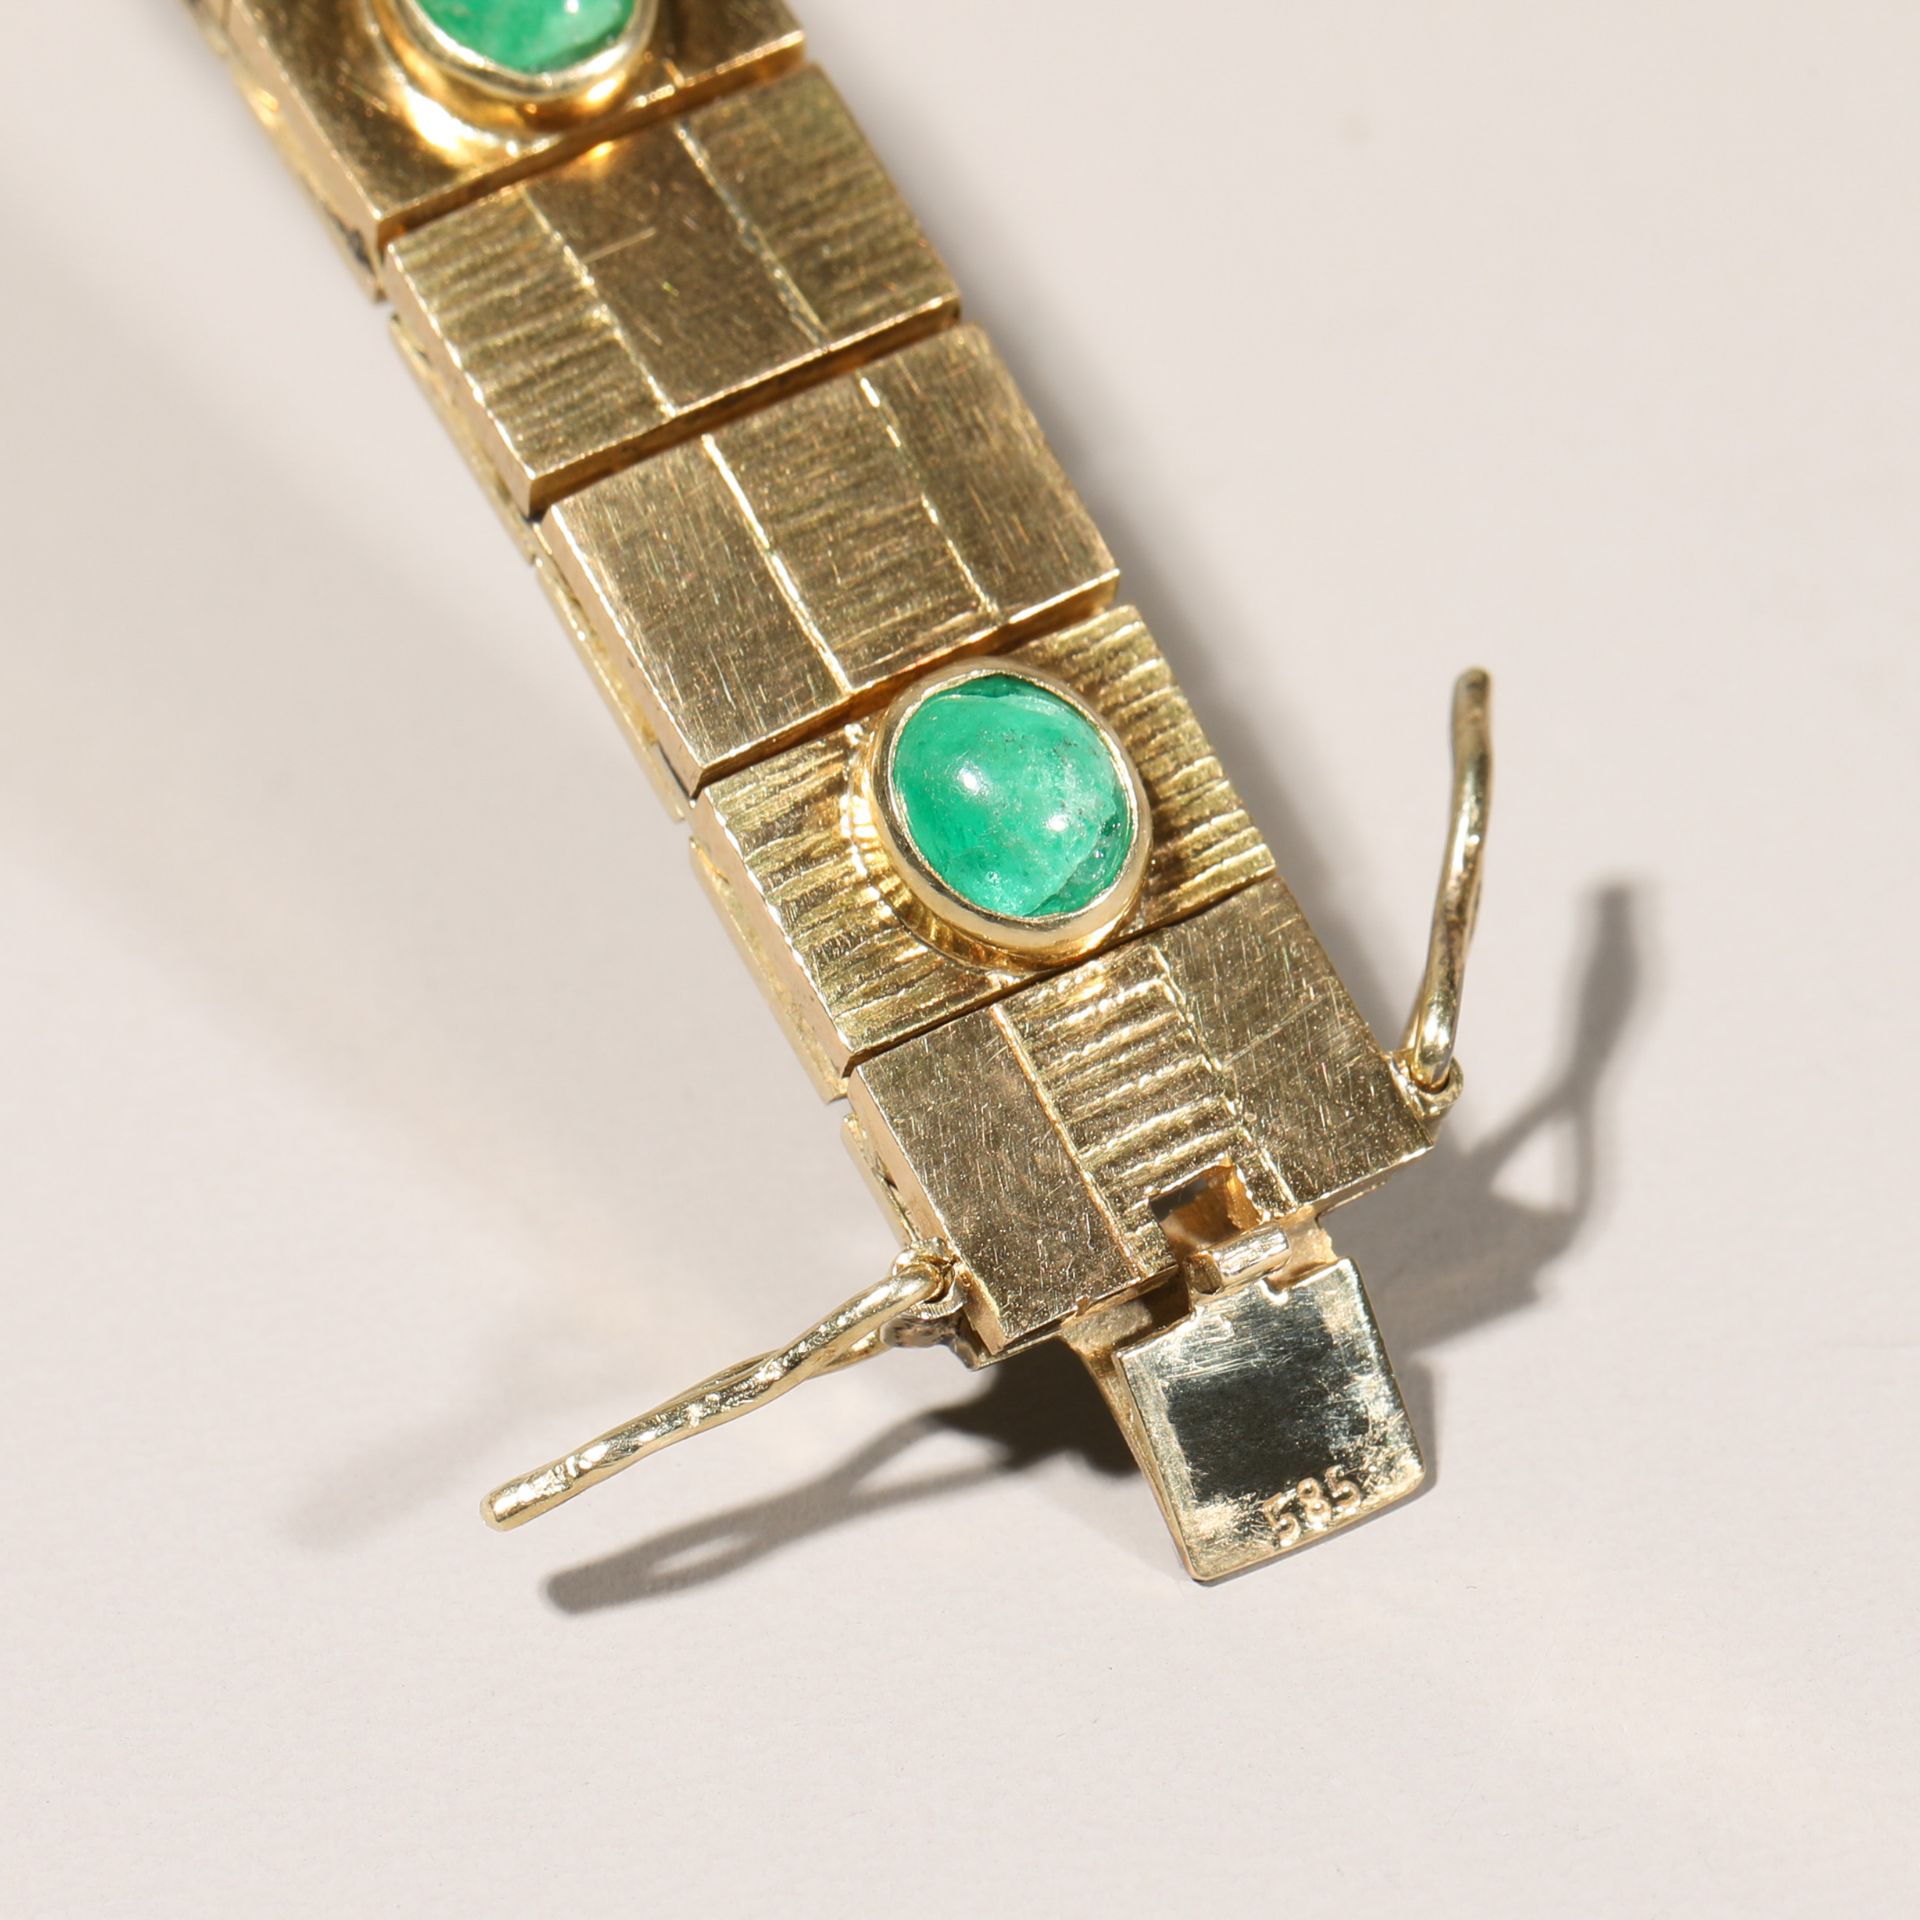 Gold bracelet with emerald cabochons - Image 7 of 7